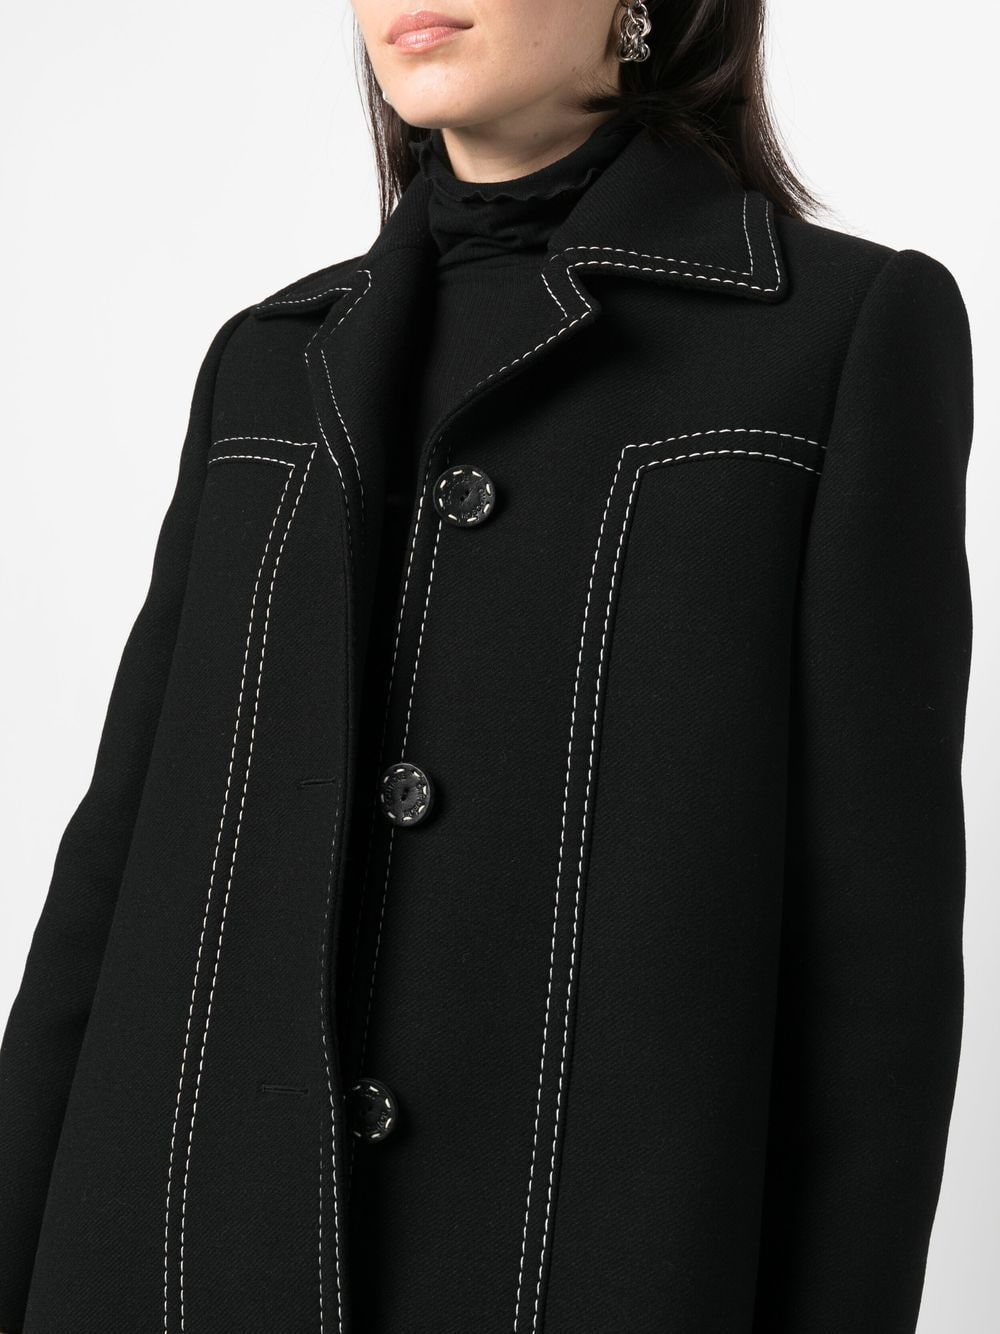 Louis Vuitton Classic Single-Breasted Coat BLACK. Size 46